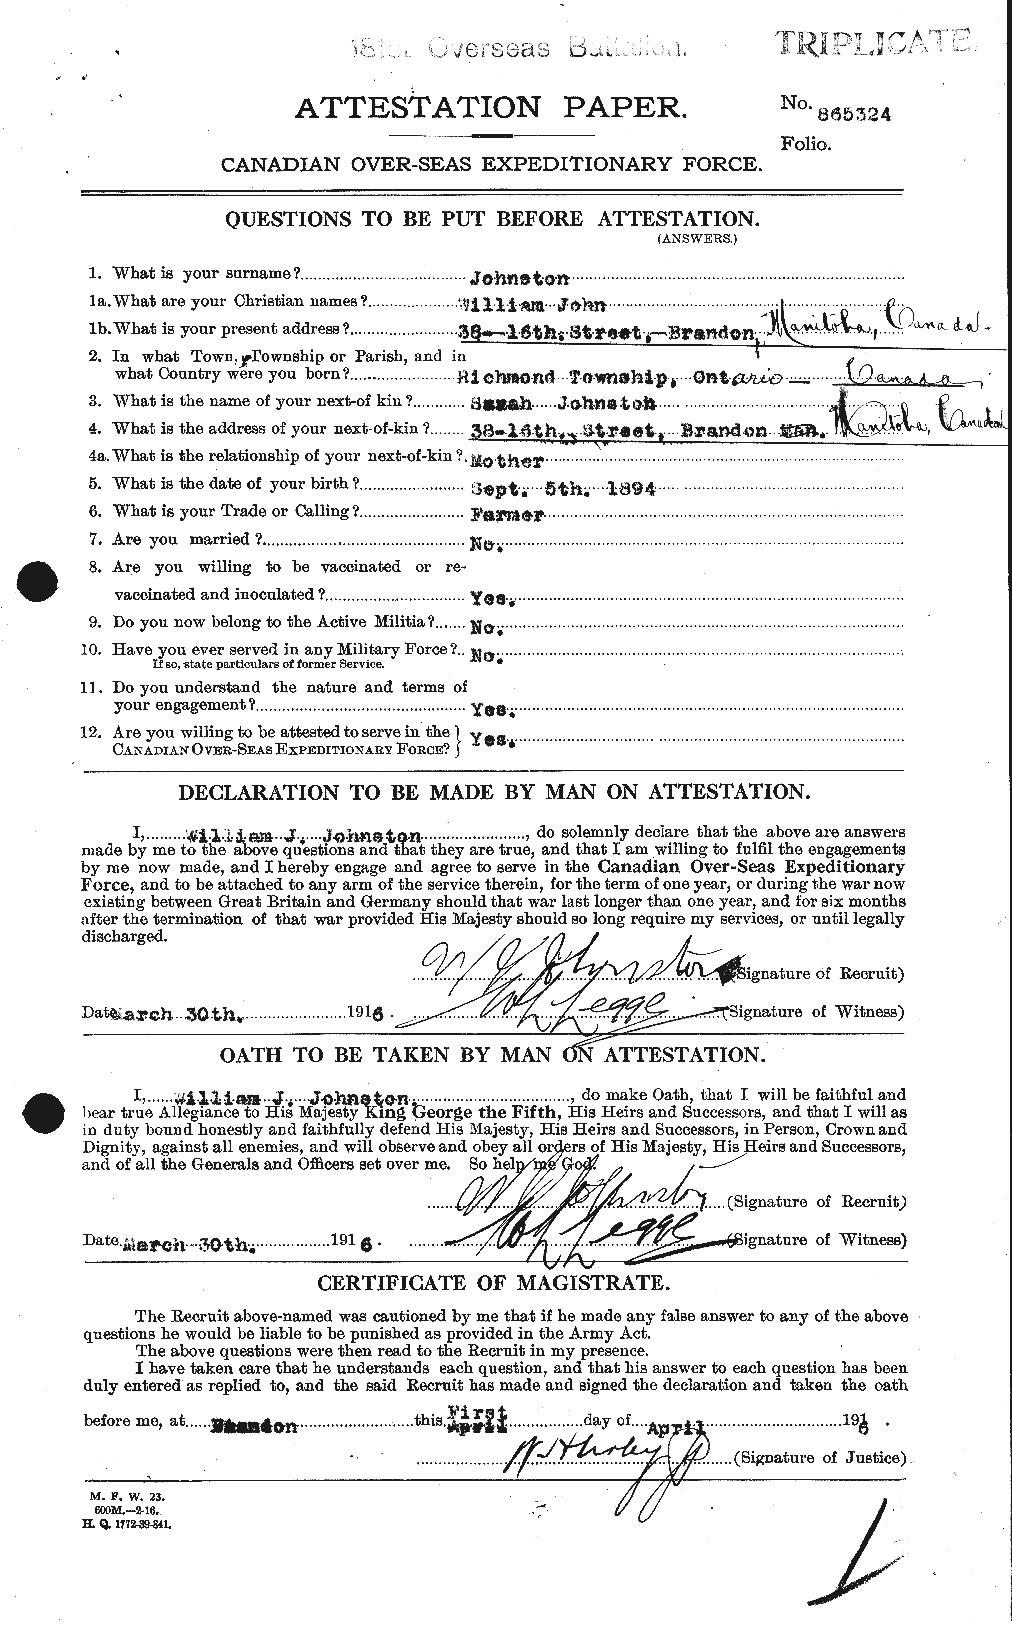 Personnel Records of the First World War - CEF 429590a